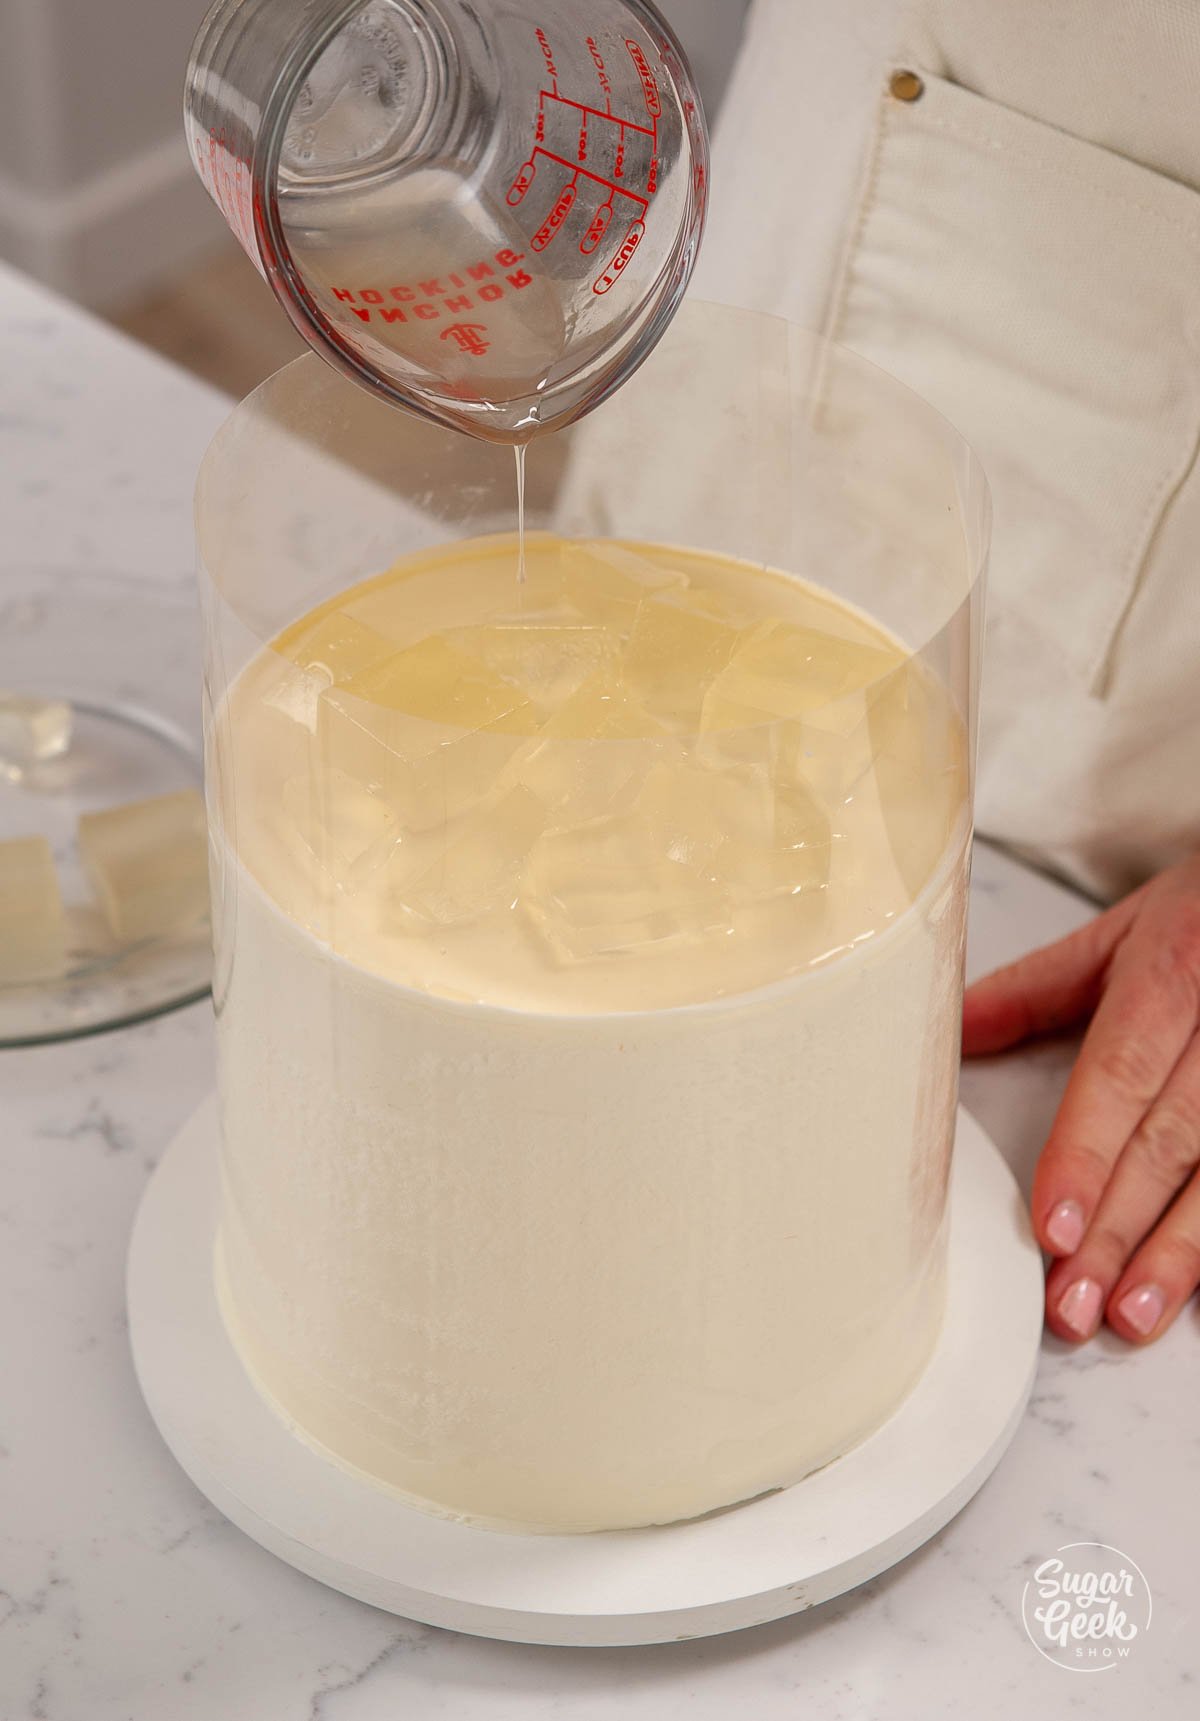 adding a thin layer of margarita gelatin to the top of the cake